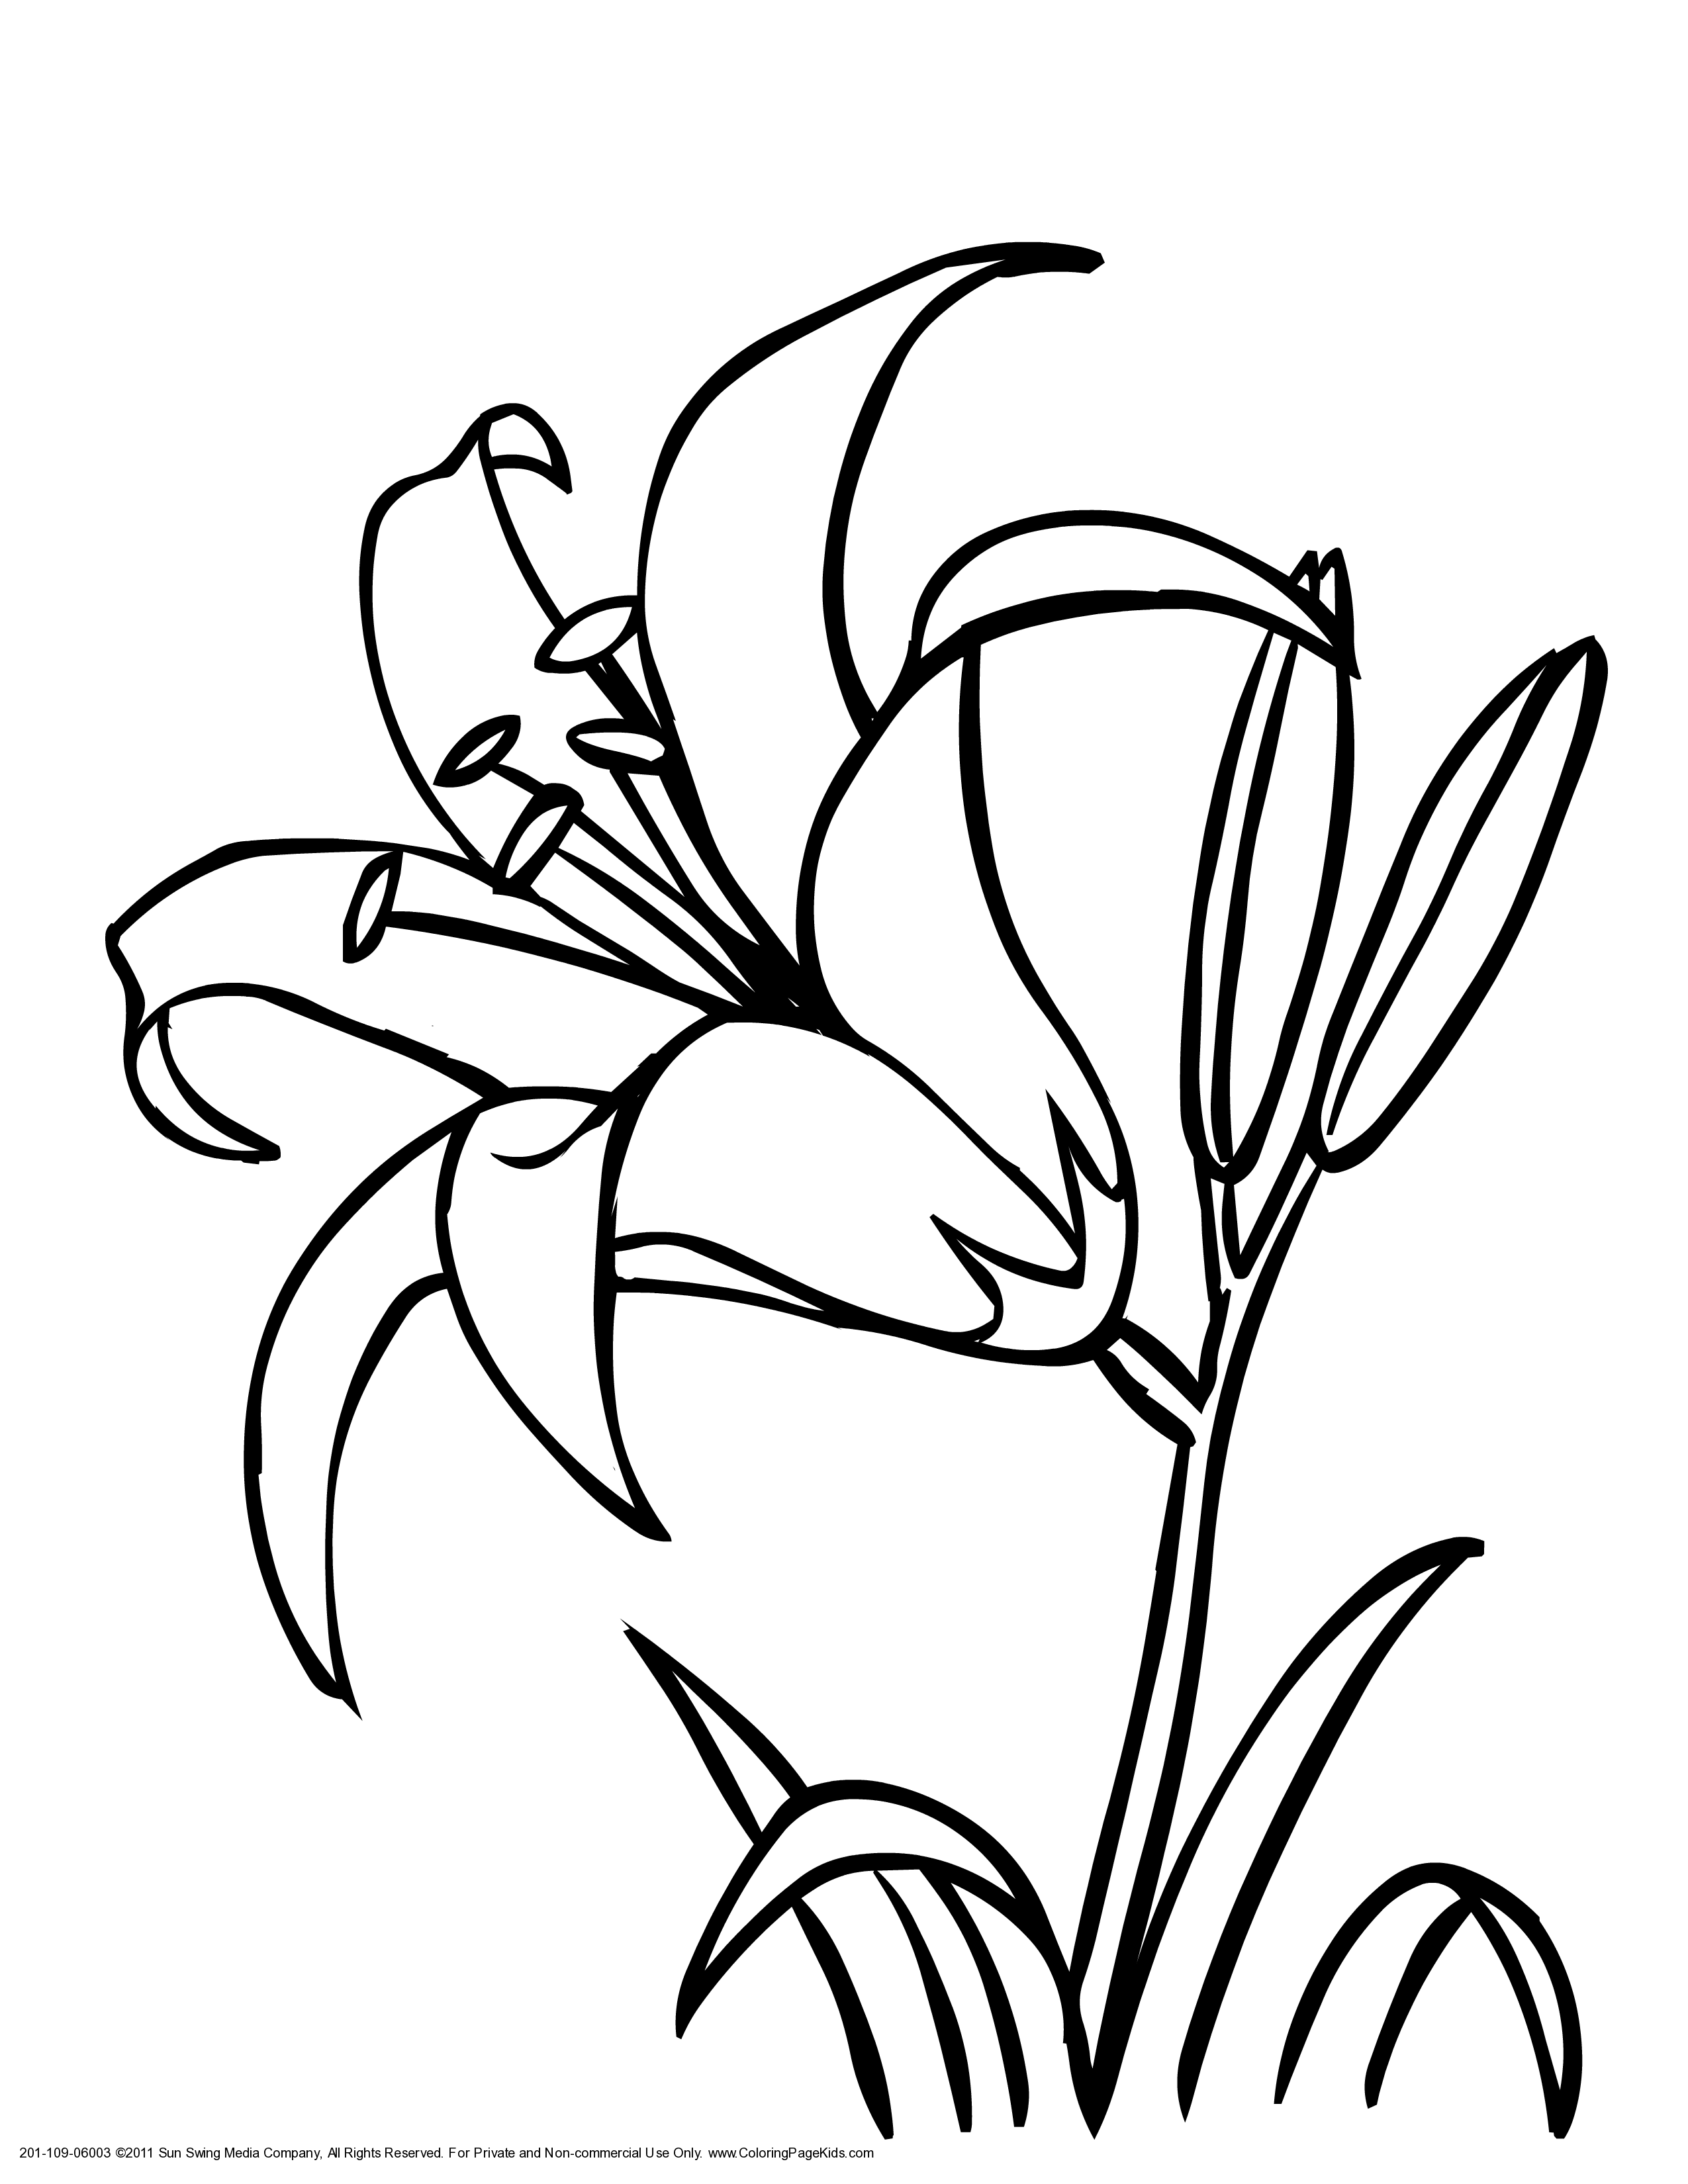 Daylily Flower Coloring Page